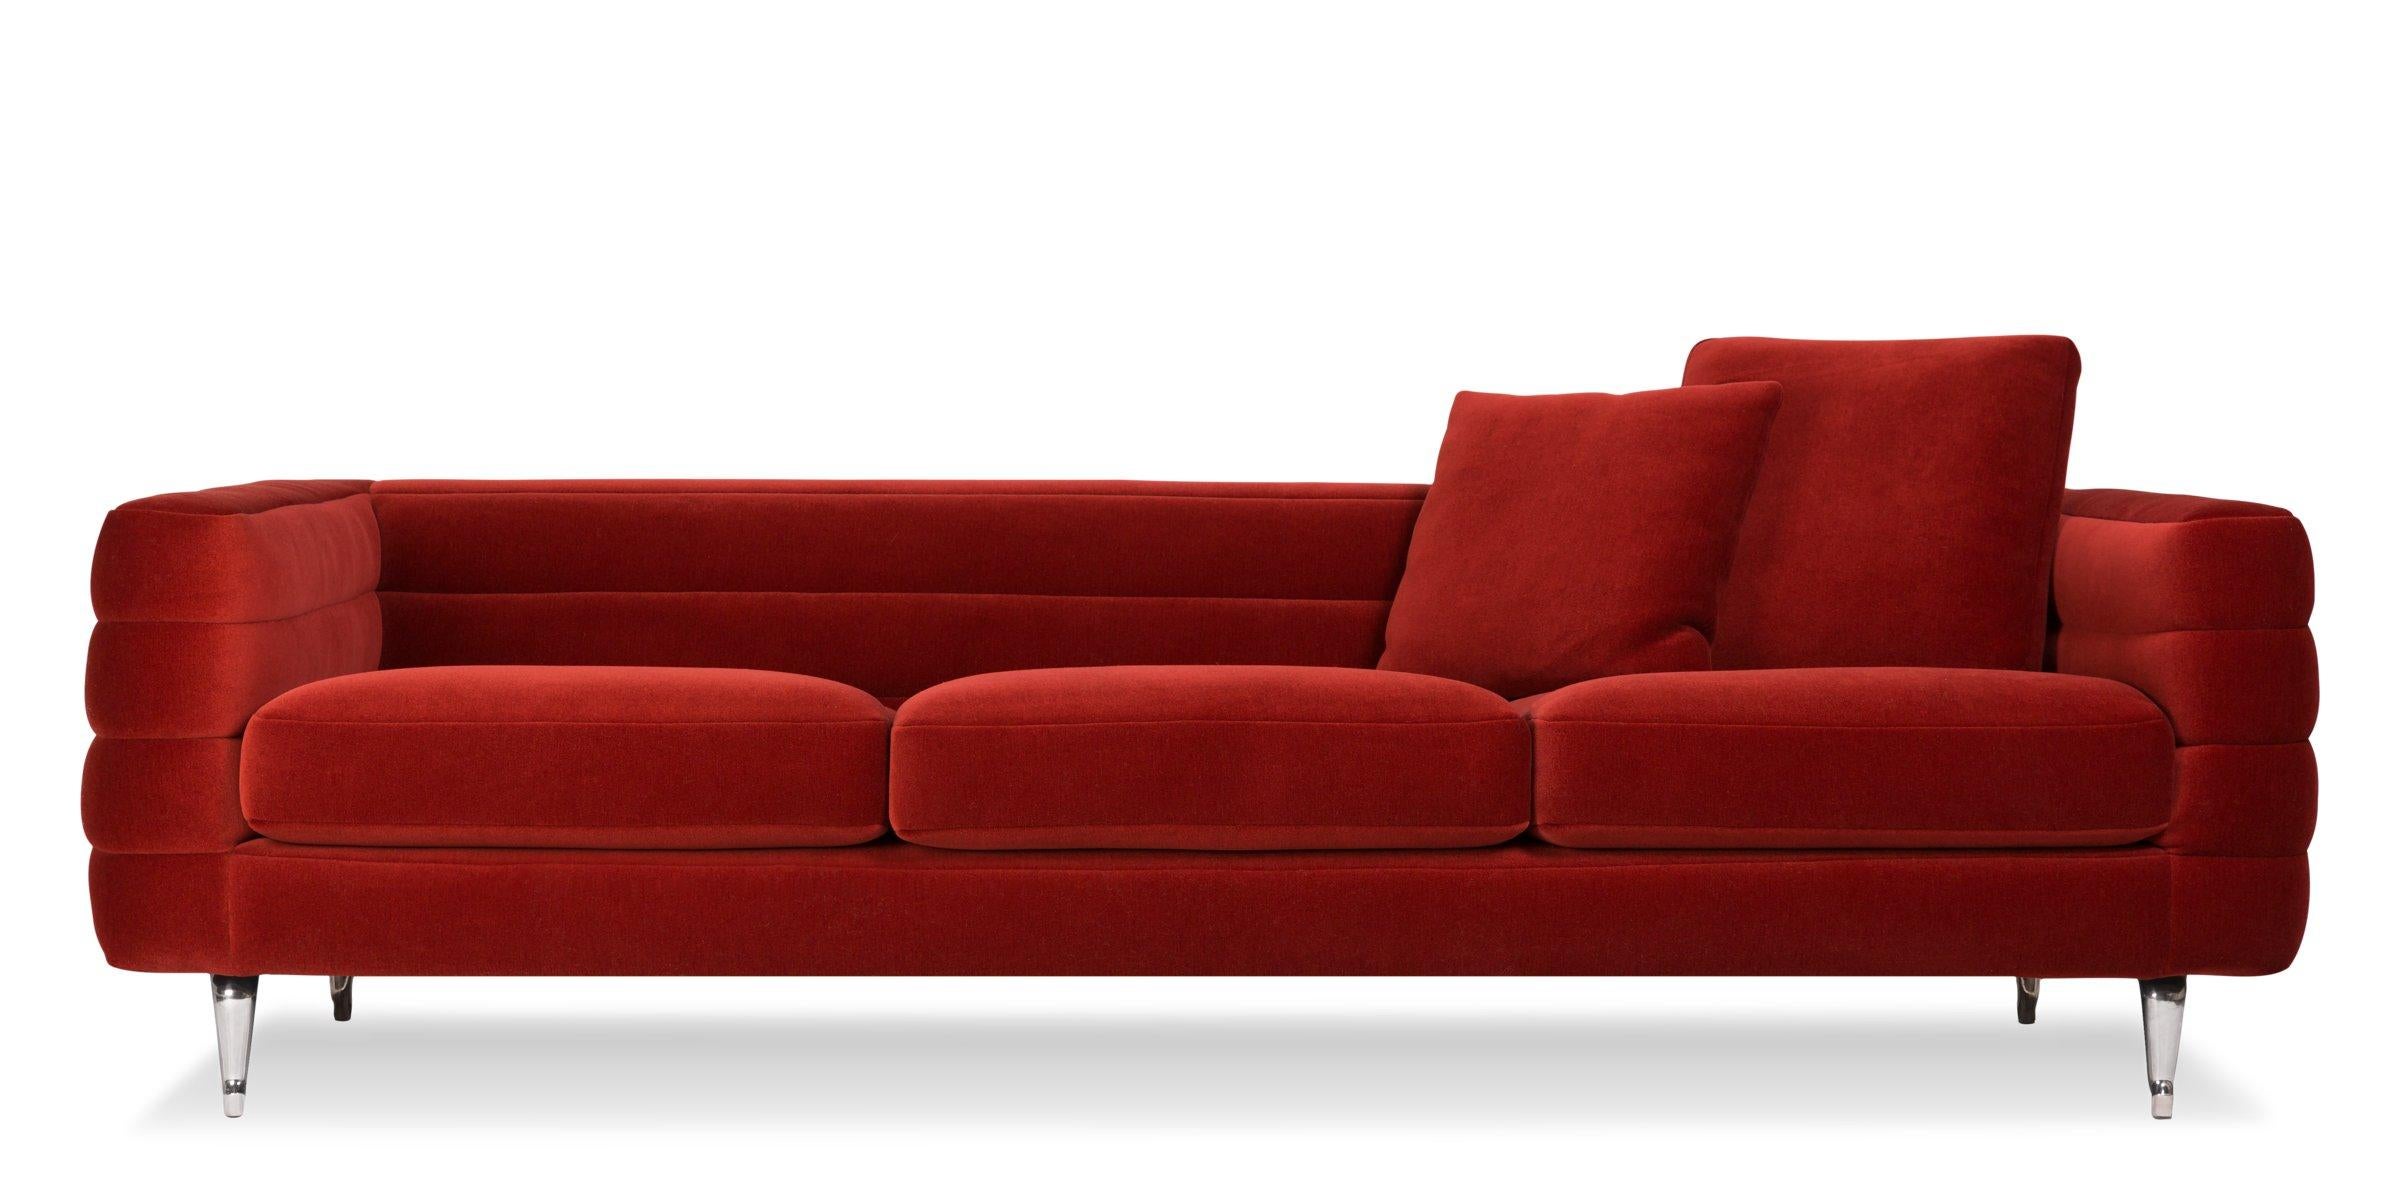 Conceived, developed and designed by Marcel Wanders for Moooi, the Boutique sofa is timeless. The Boutique sofa contours, dimensions and sheer comfort makes it highly sitter-friendly. With a unique artistic temperament and specially design fabrics &